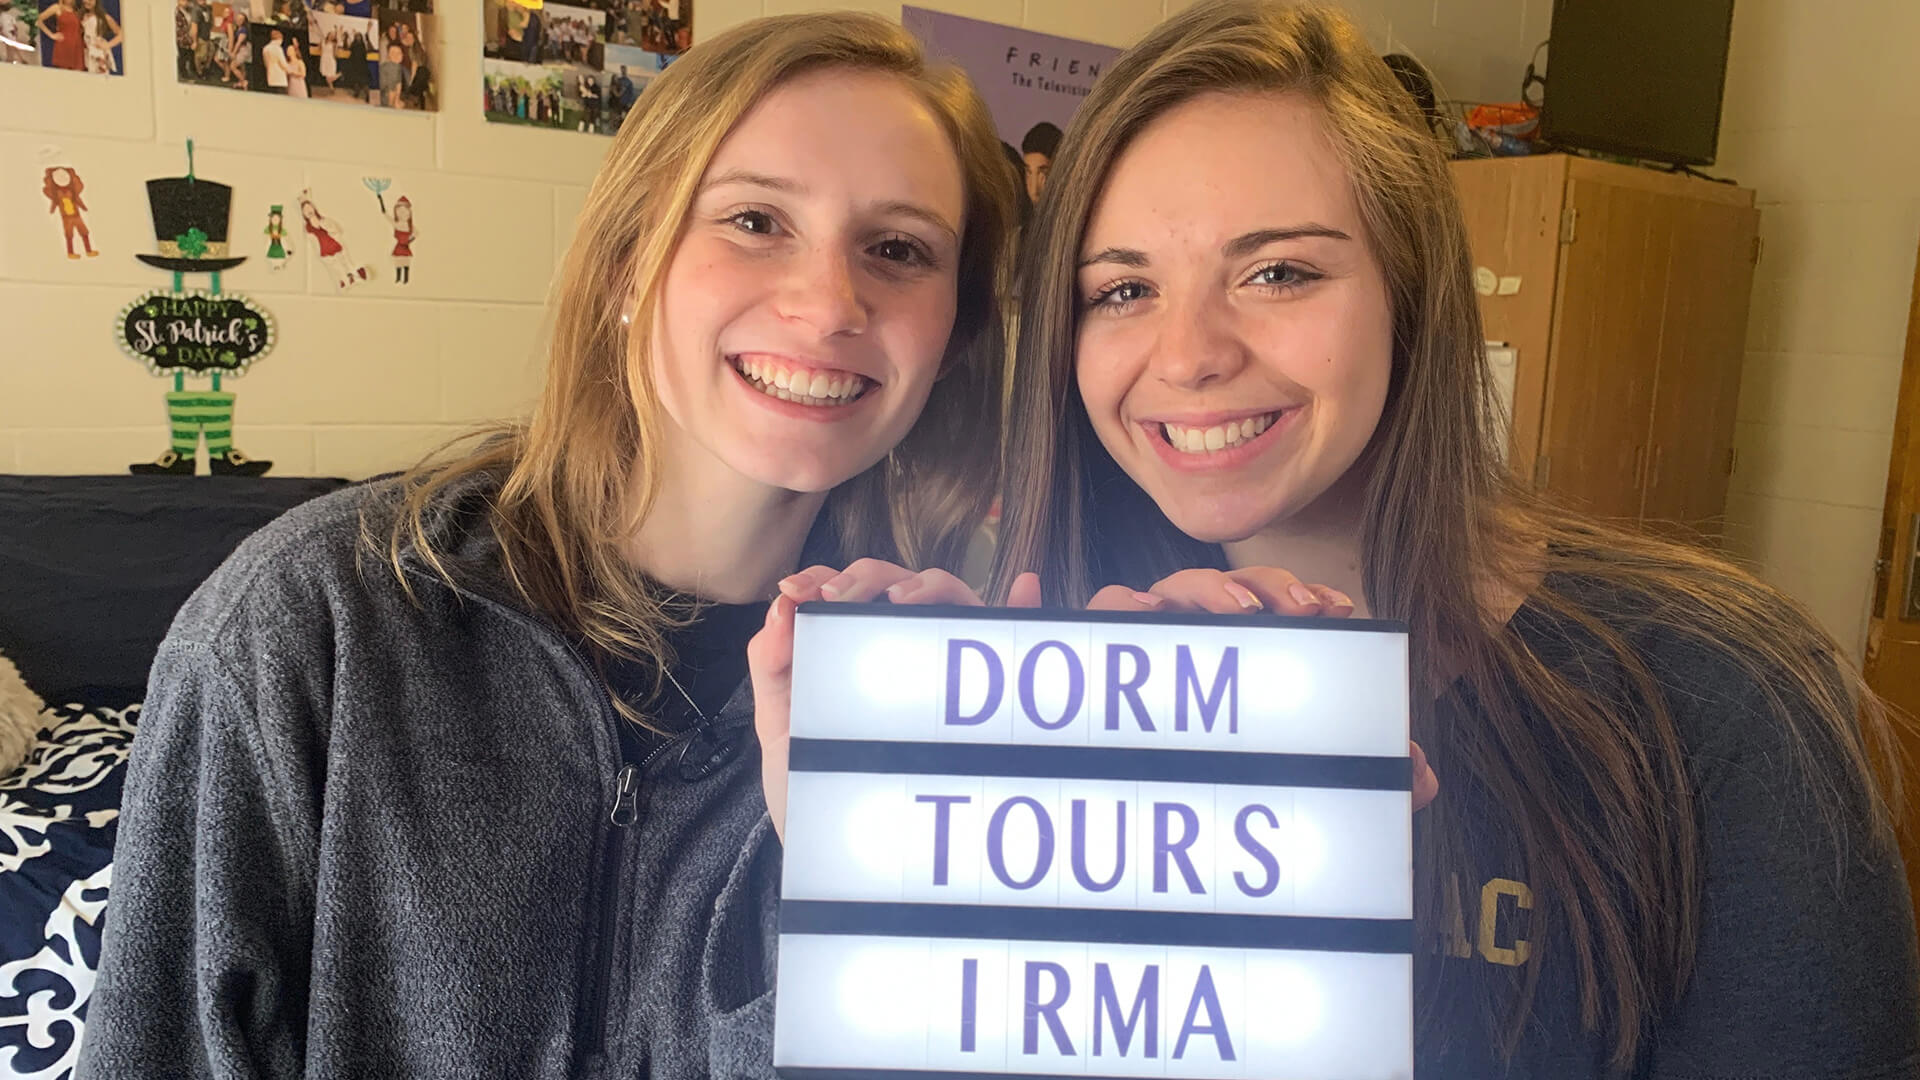 Suzette holding an Irma sign with her roommate